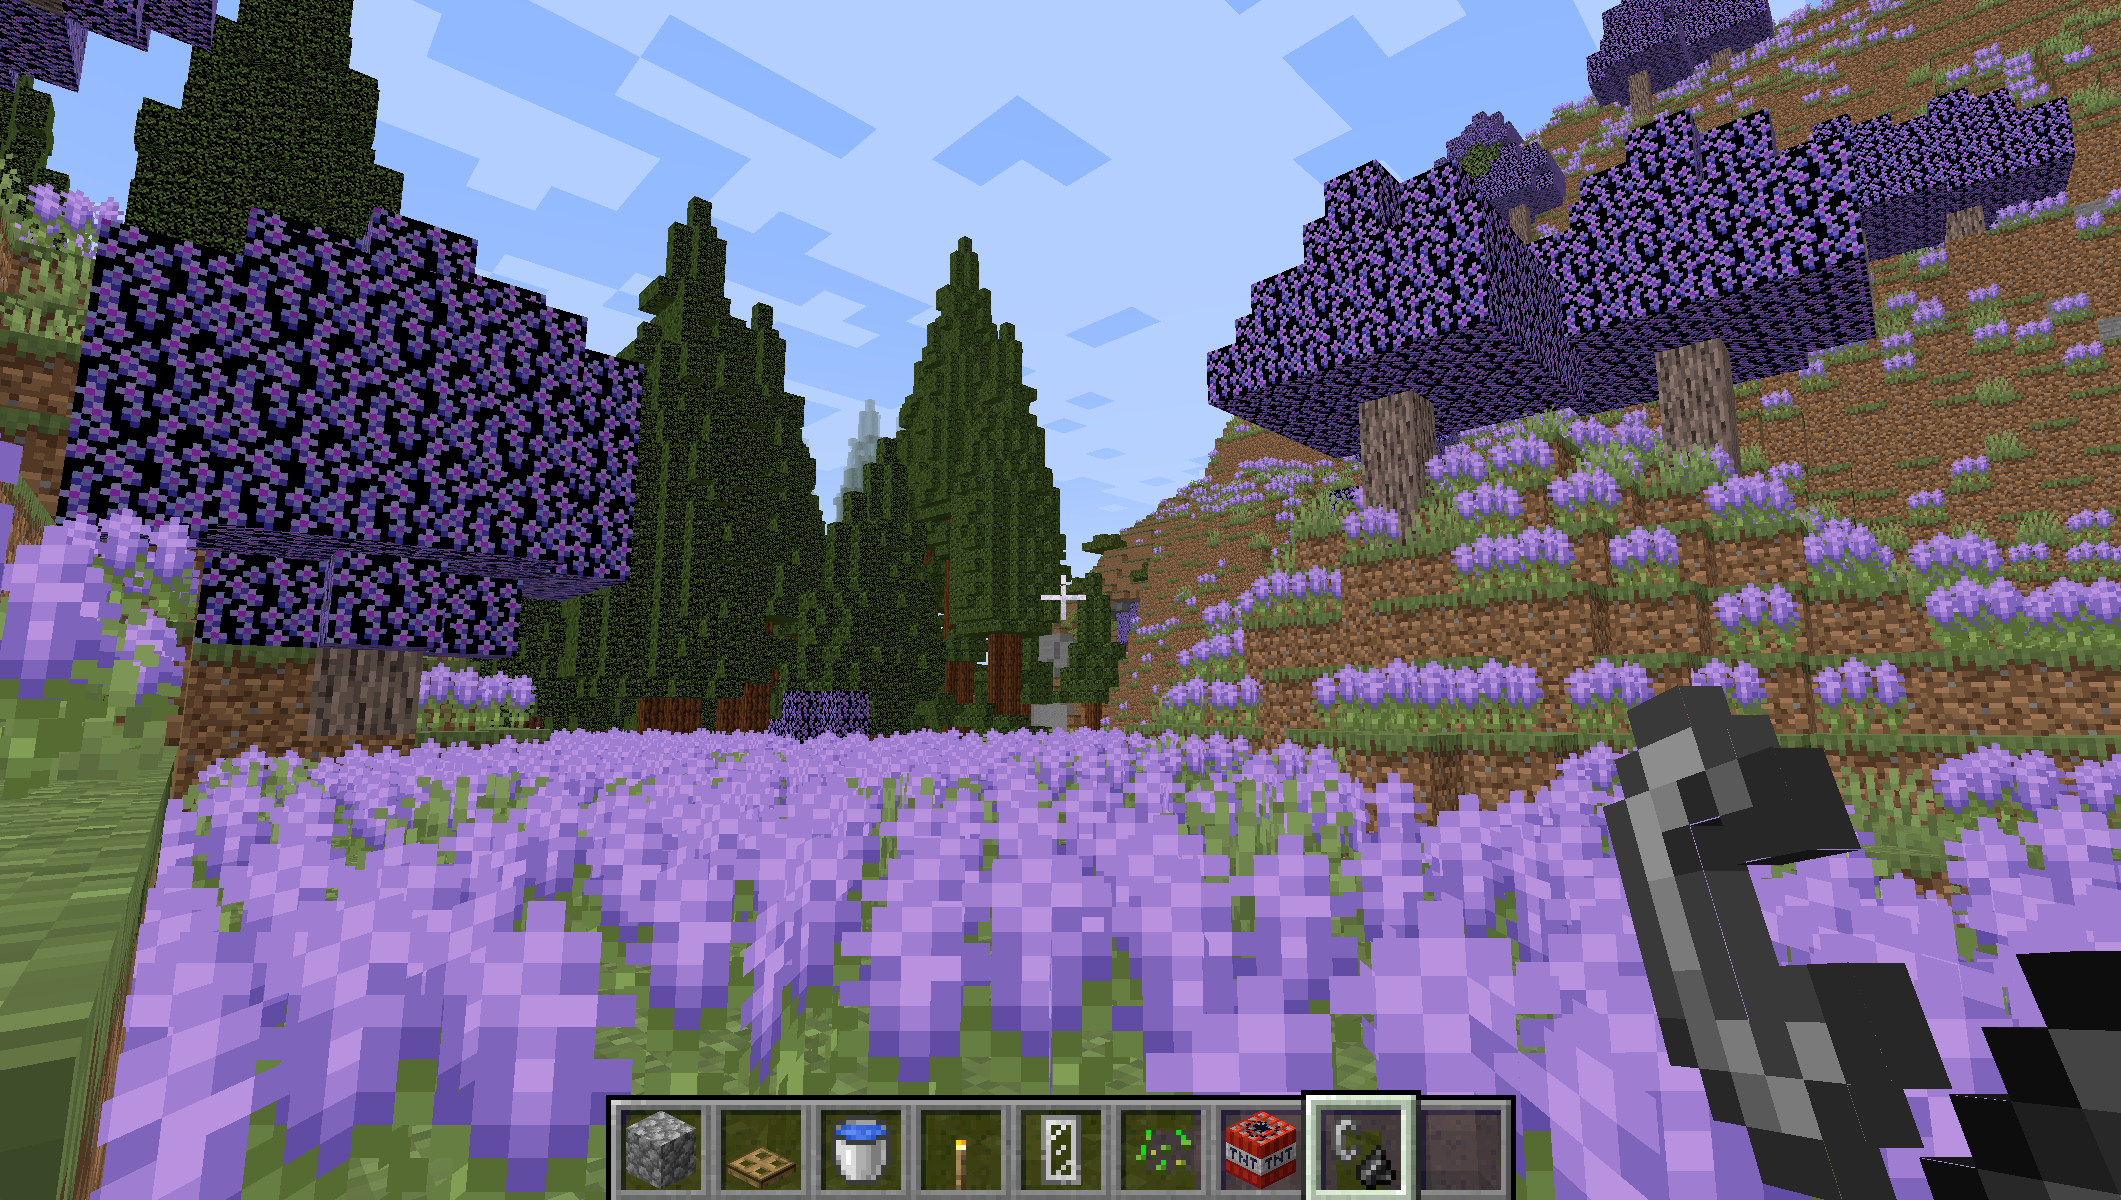 A screenshot from Minecraft, showing a redwood forest and lavender garden growing next to each other with the Biomes O' Plenty mod.